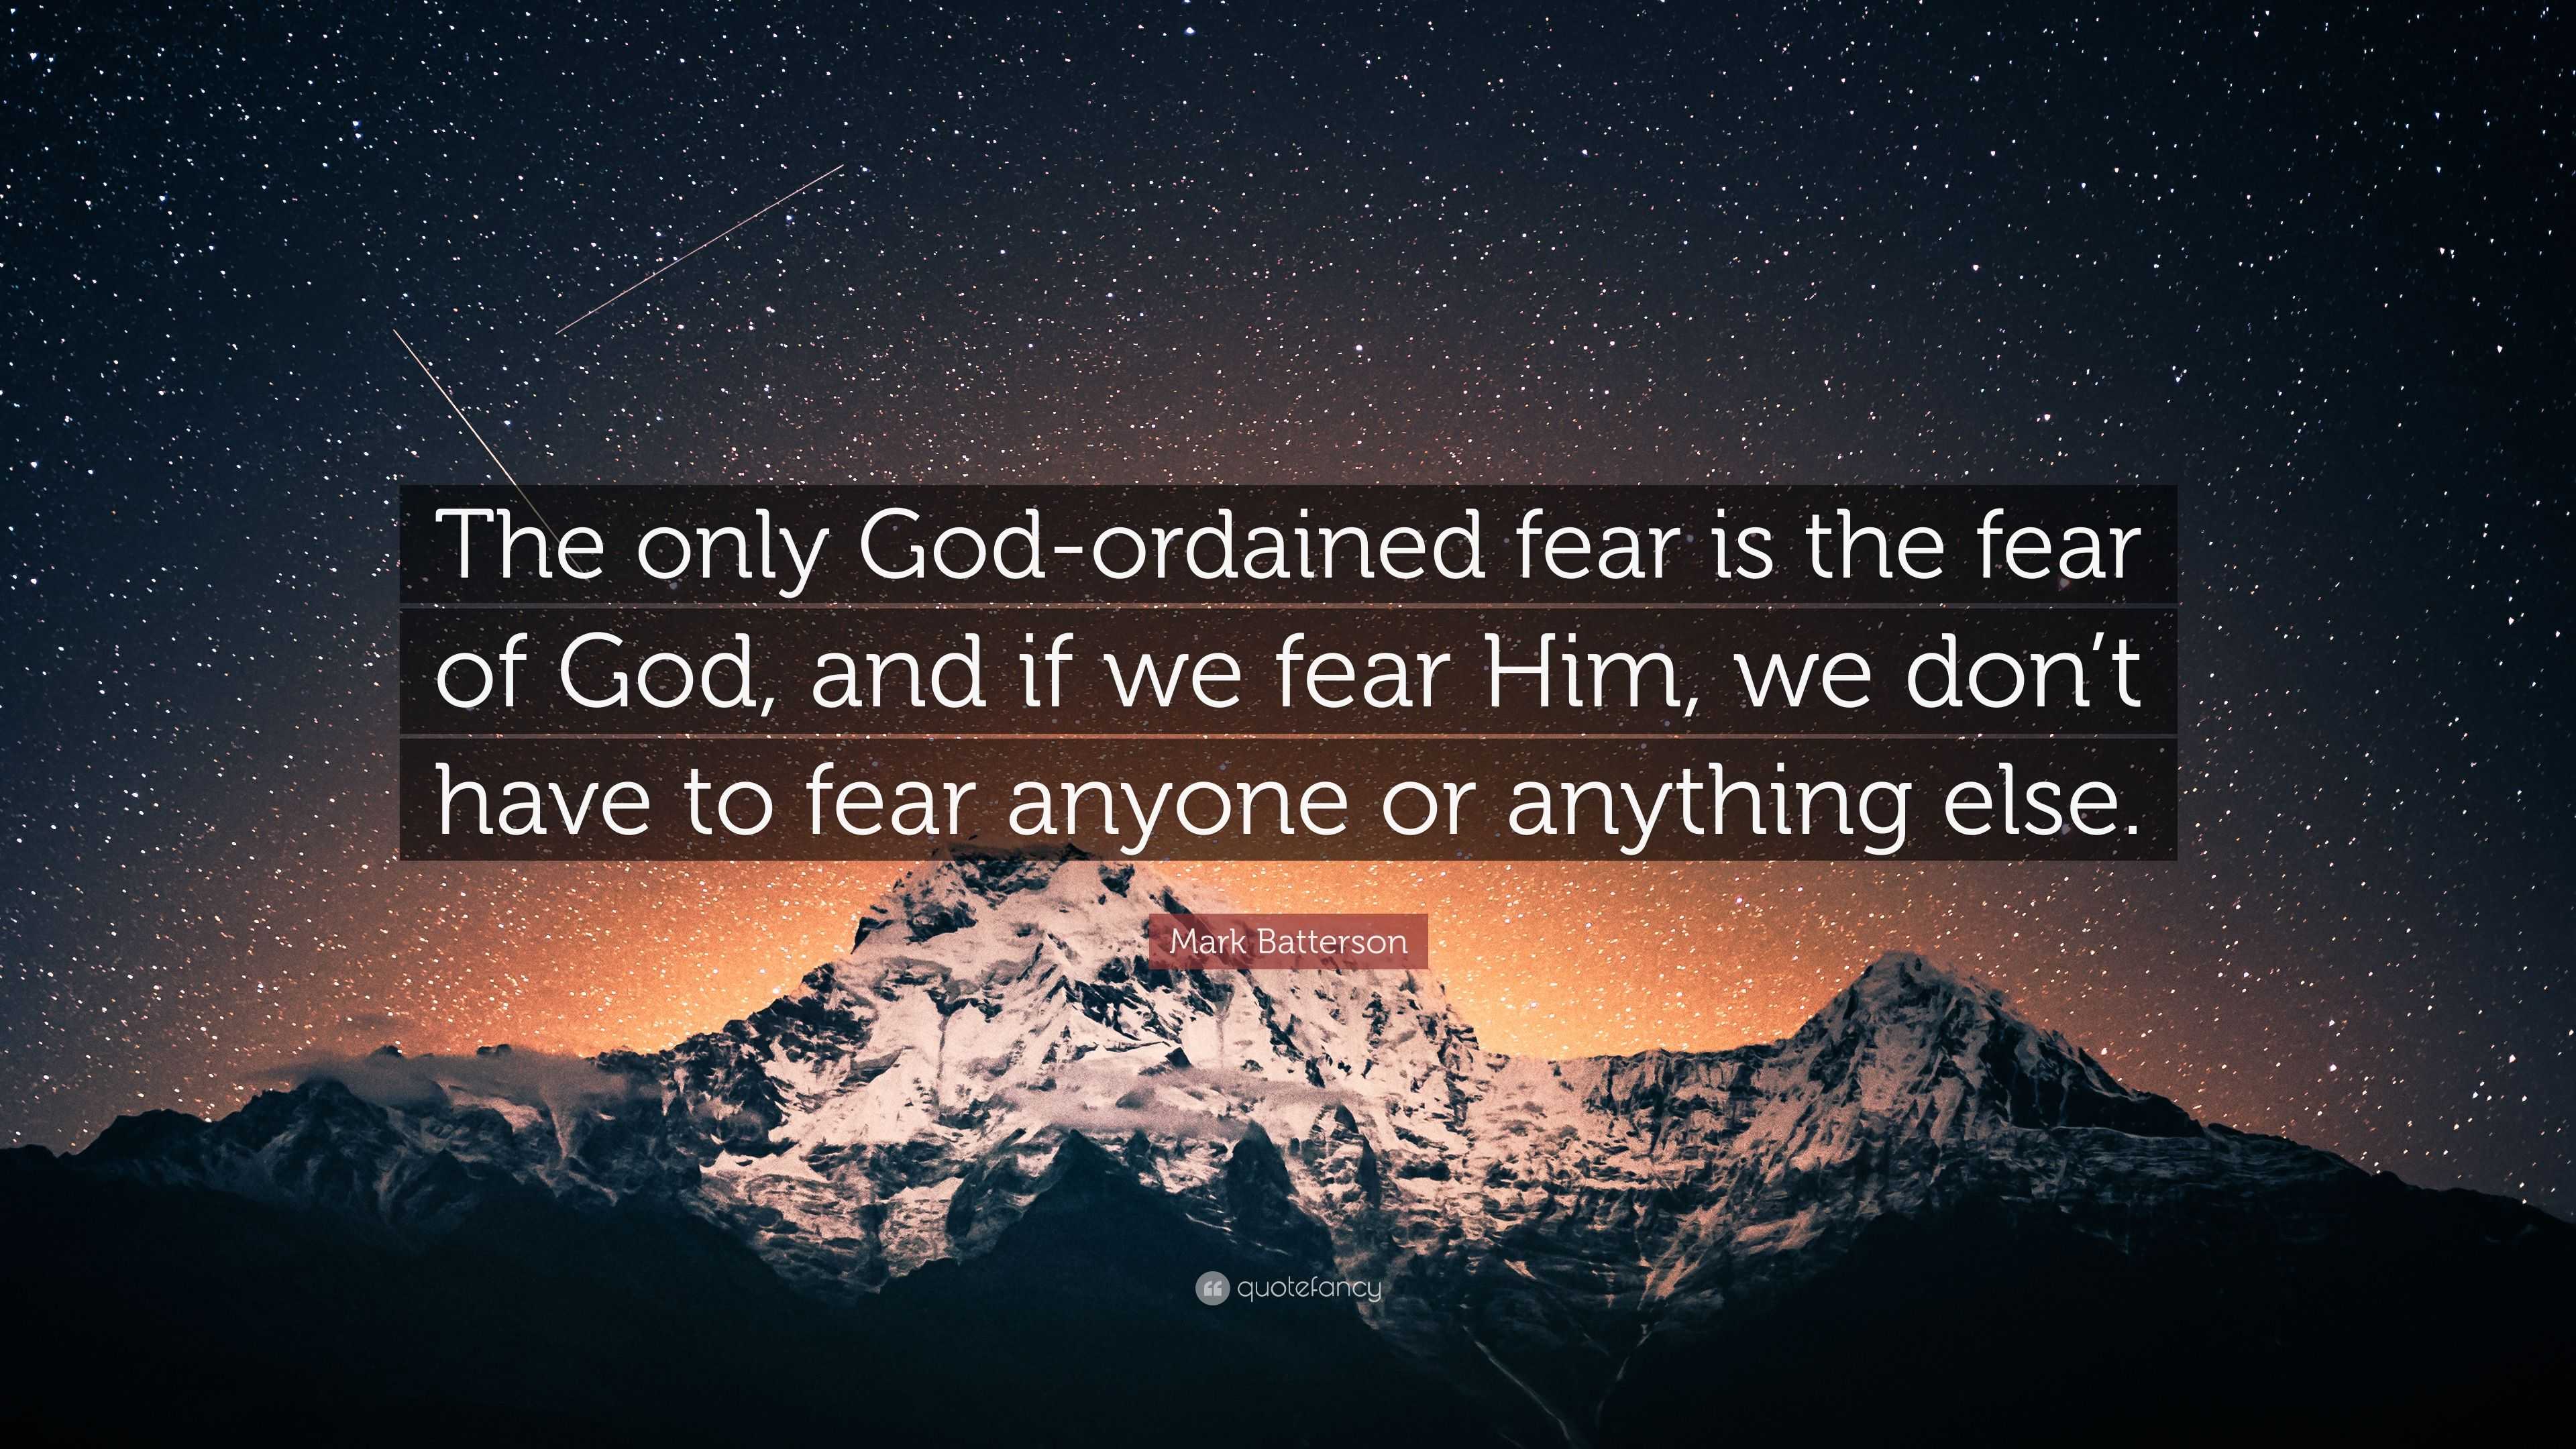 Mark Batterson Quote “the Only God Ordained Fear Is The Fear Of God